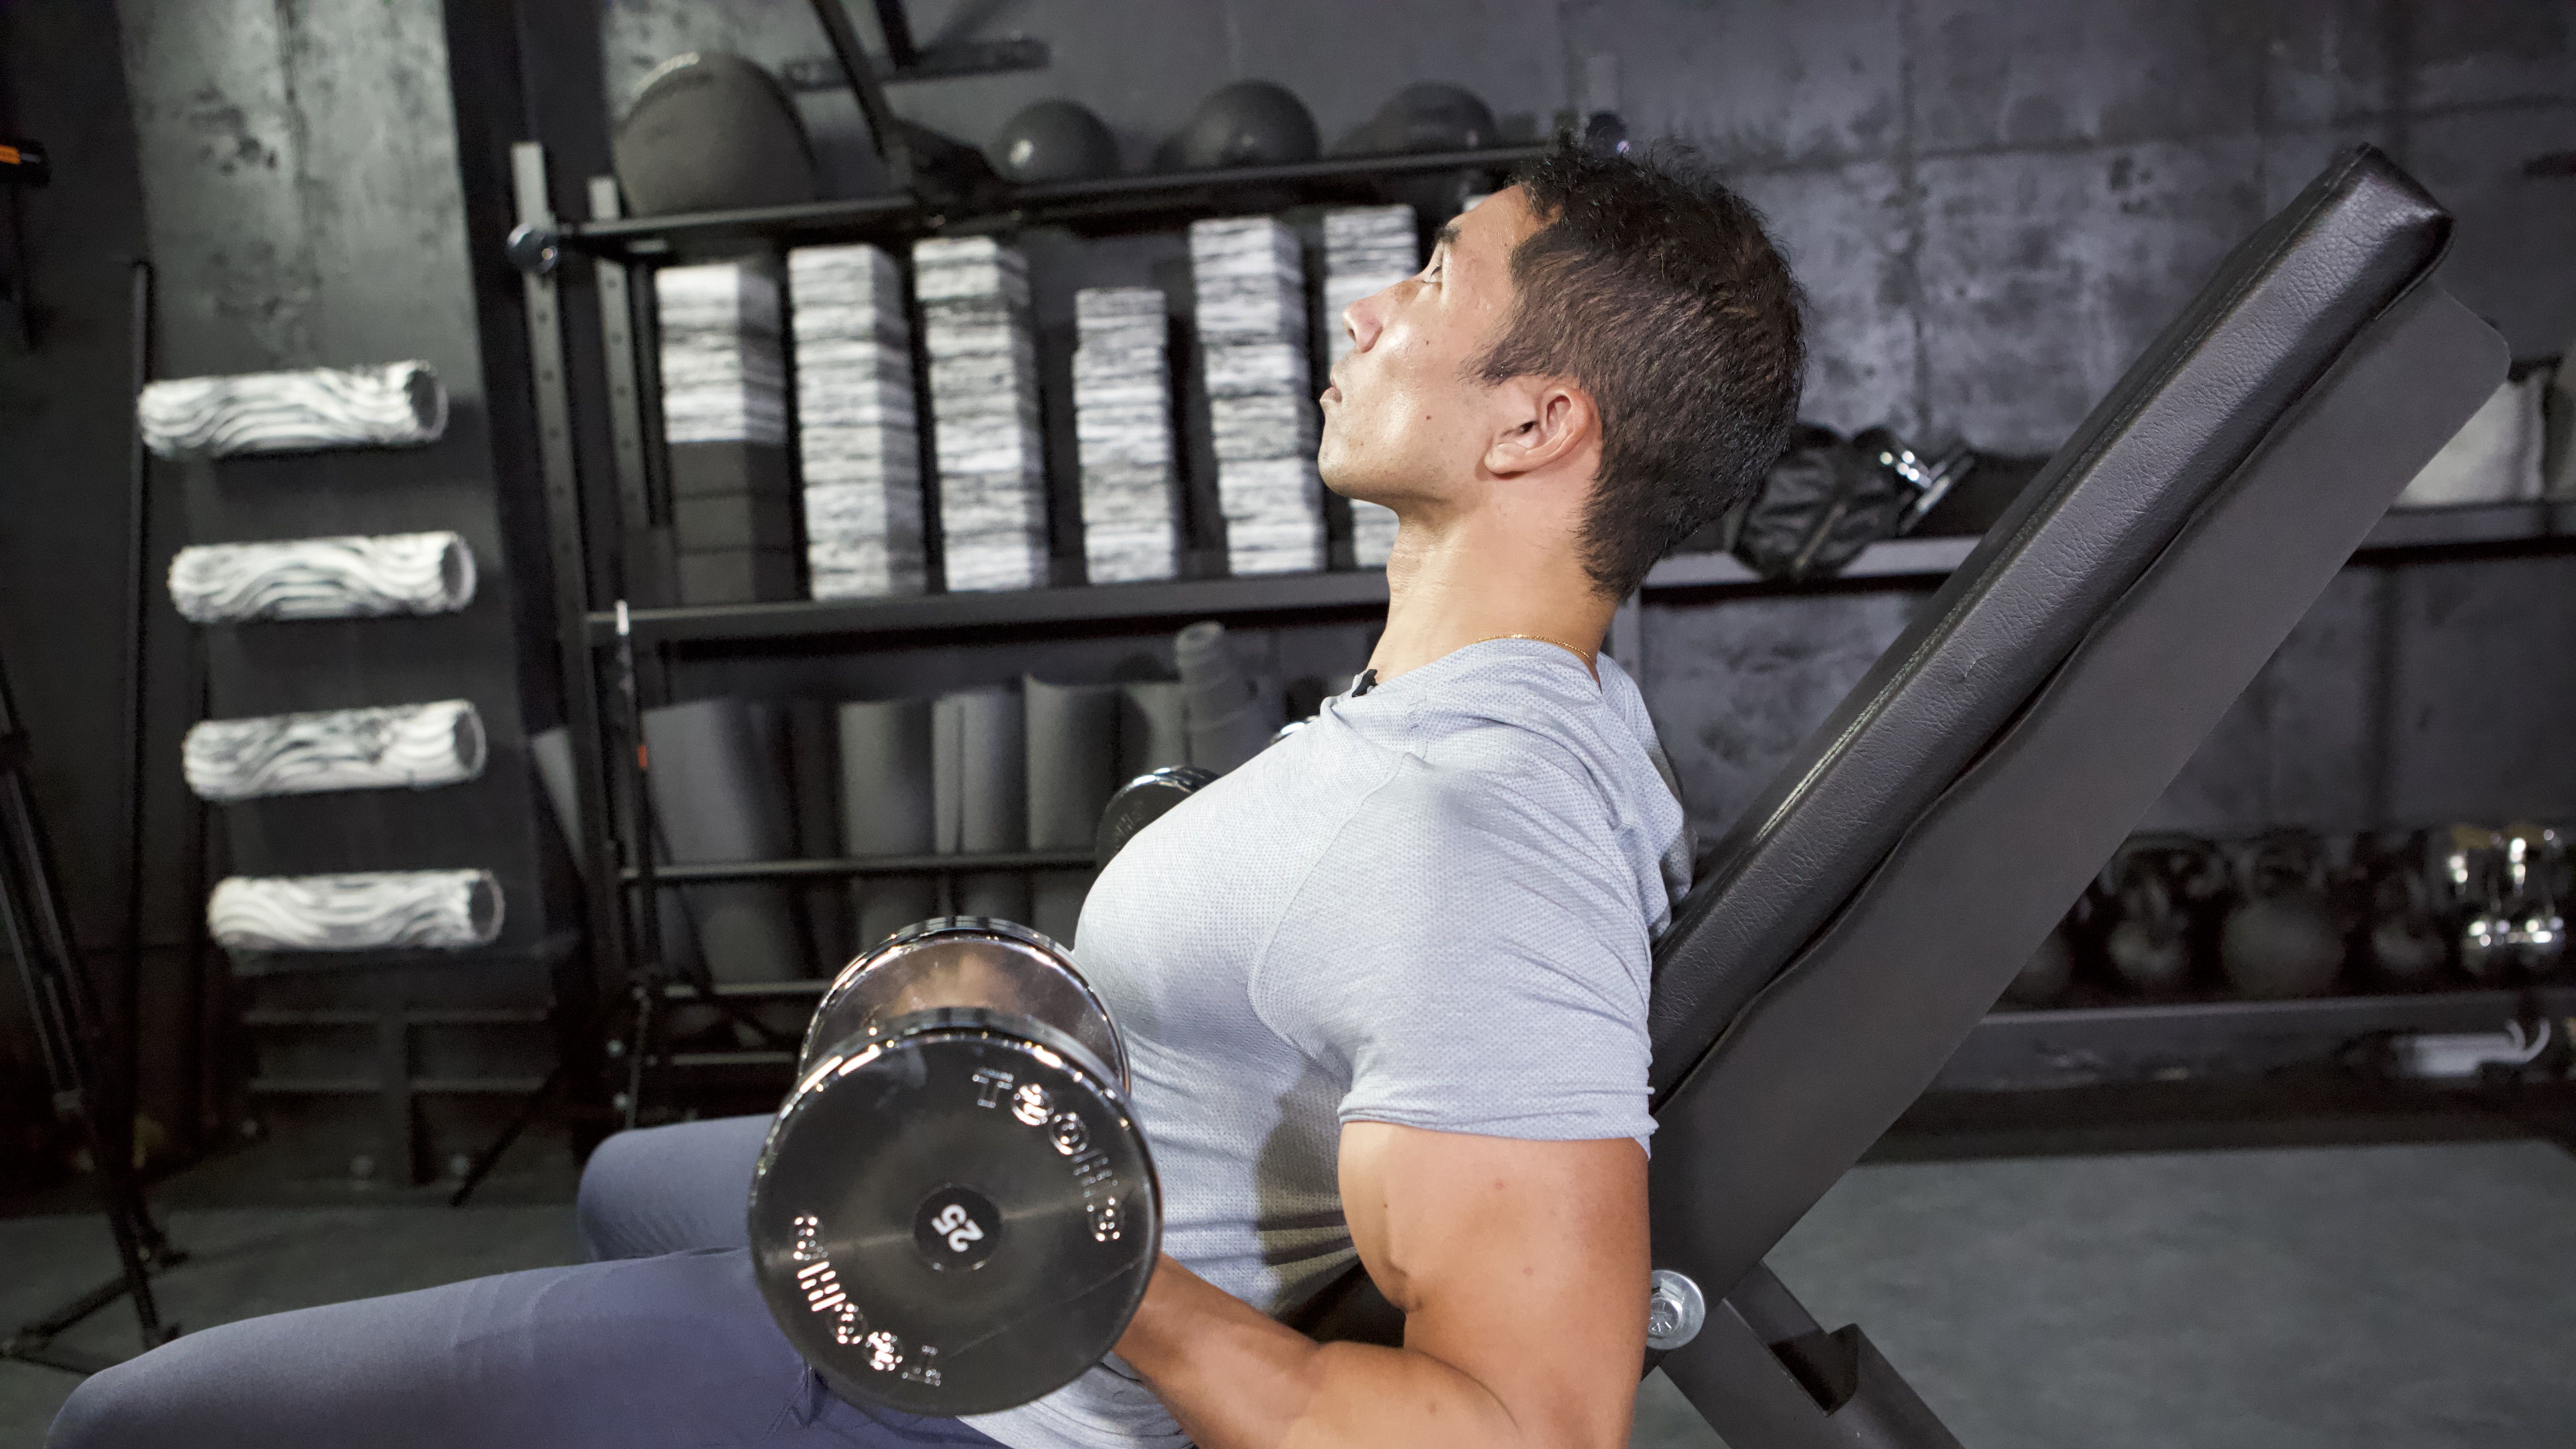 Dumbbell reverse curl instructions and video